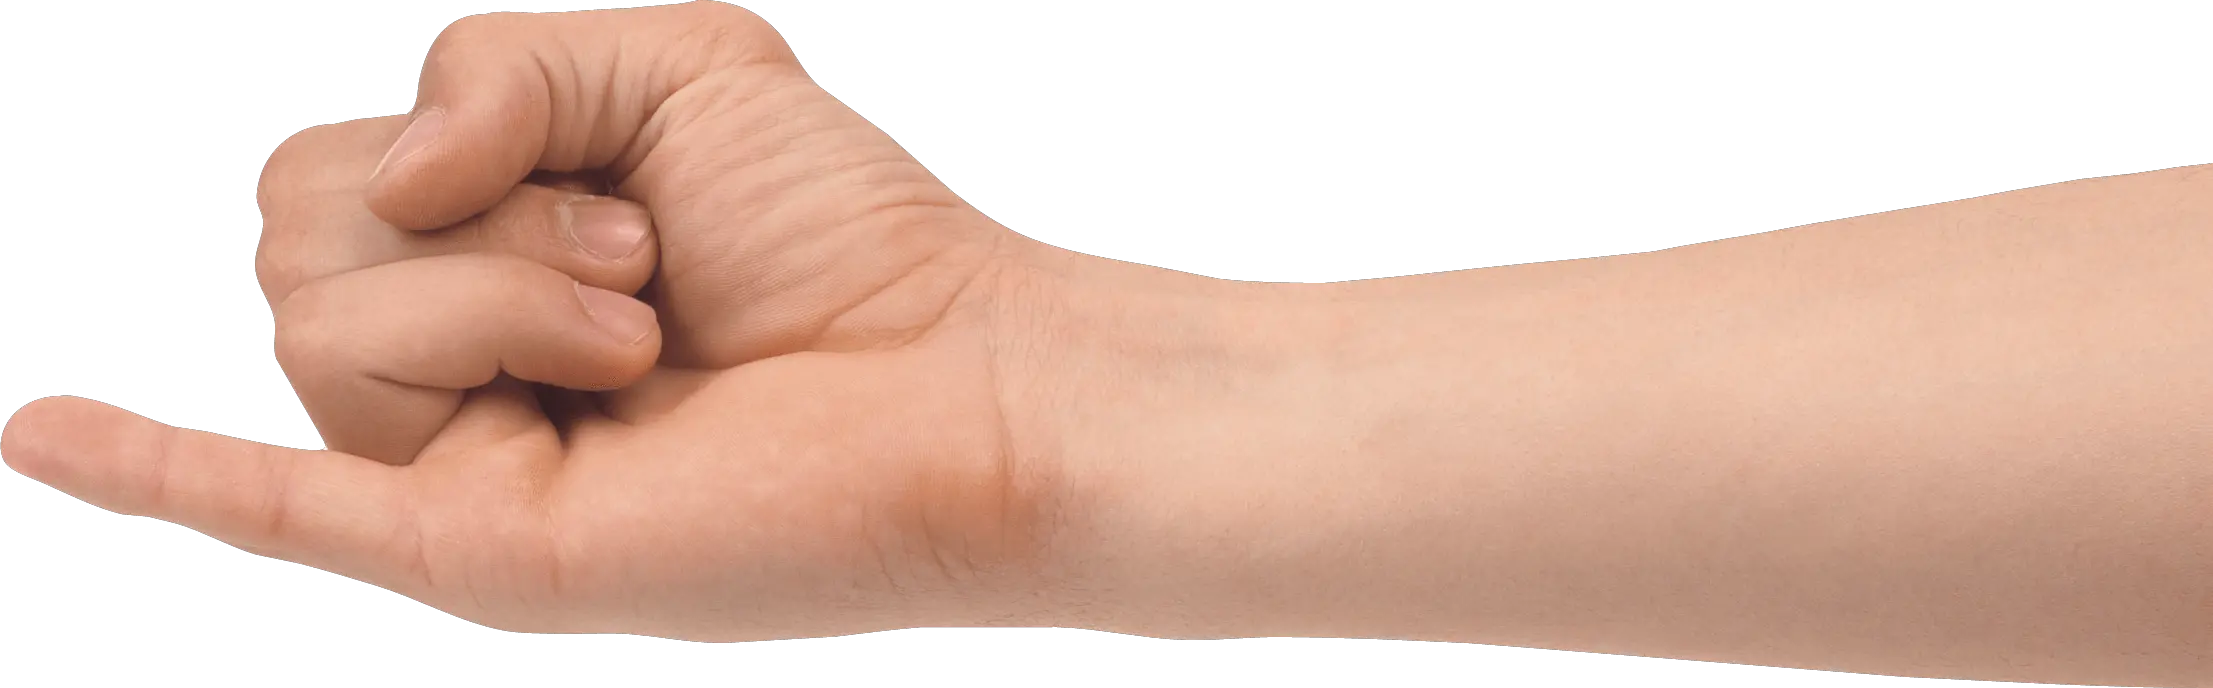 Clapping Hands Png